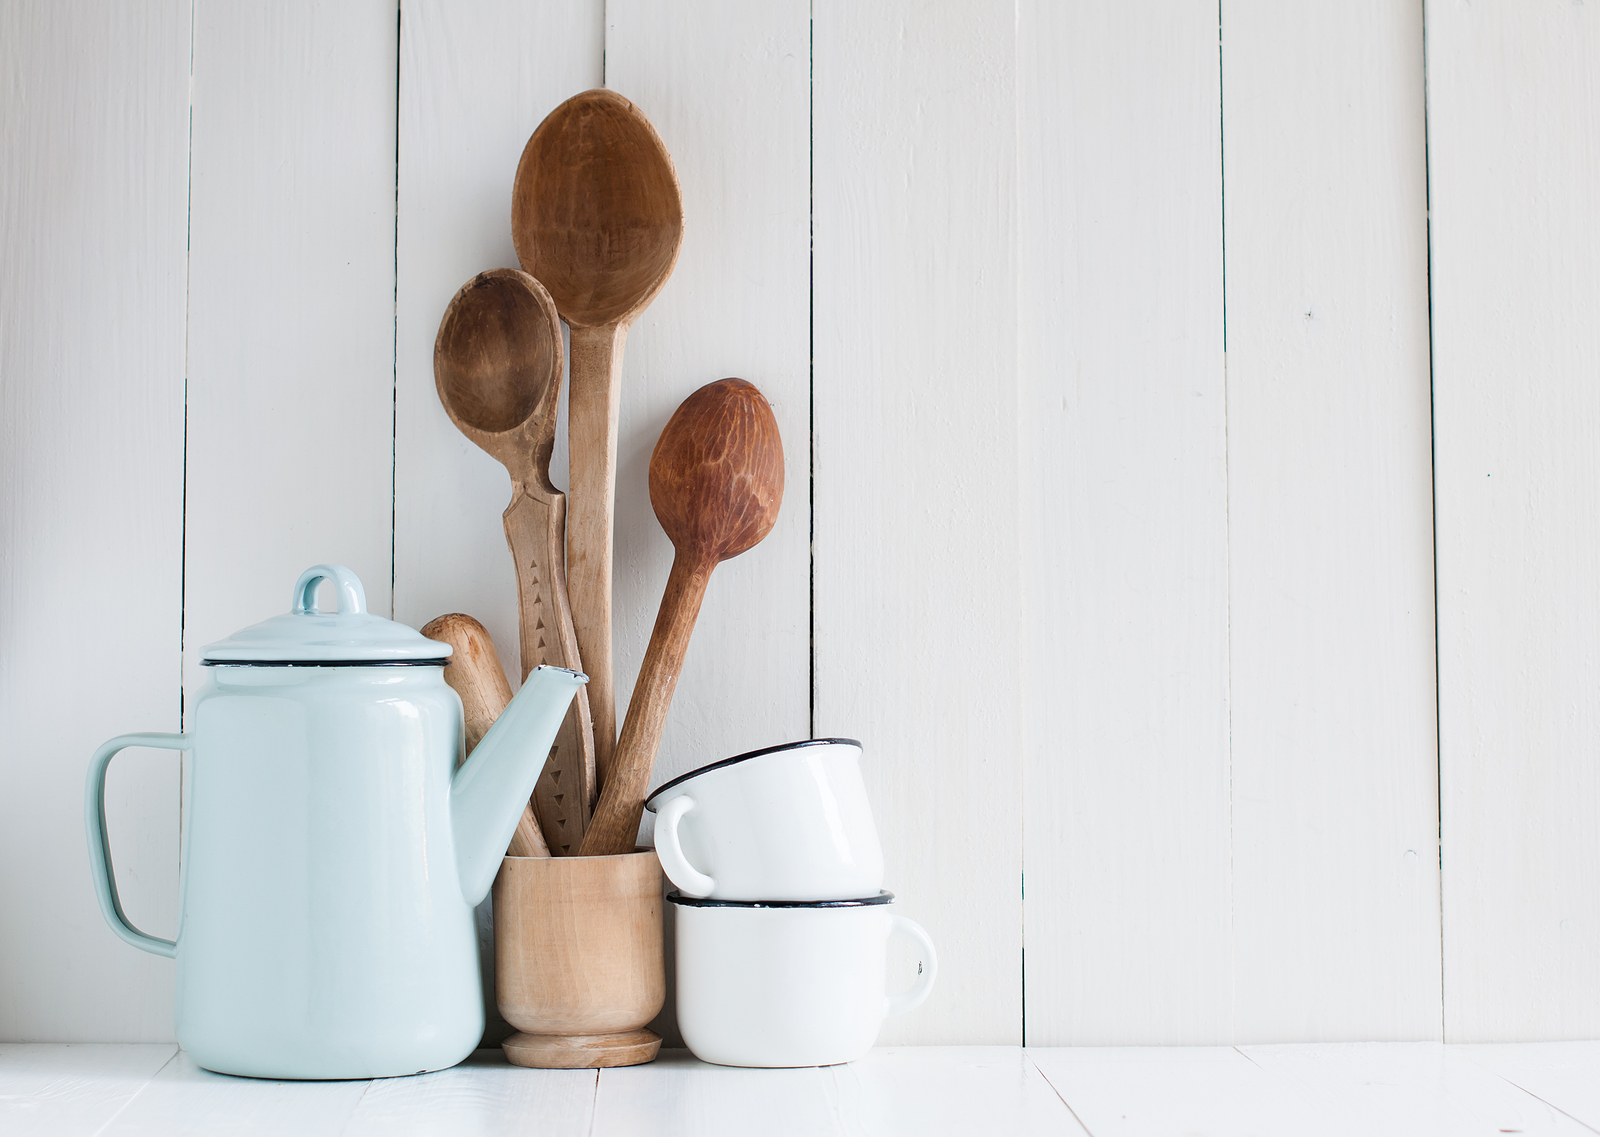 Home kitchen still life: Vintage coffee pot enamel mugs and antique rustic wooden spoons on a barn wall background soft pastel colors.